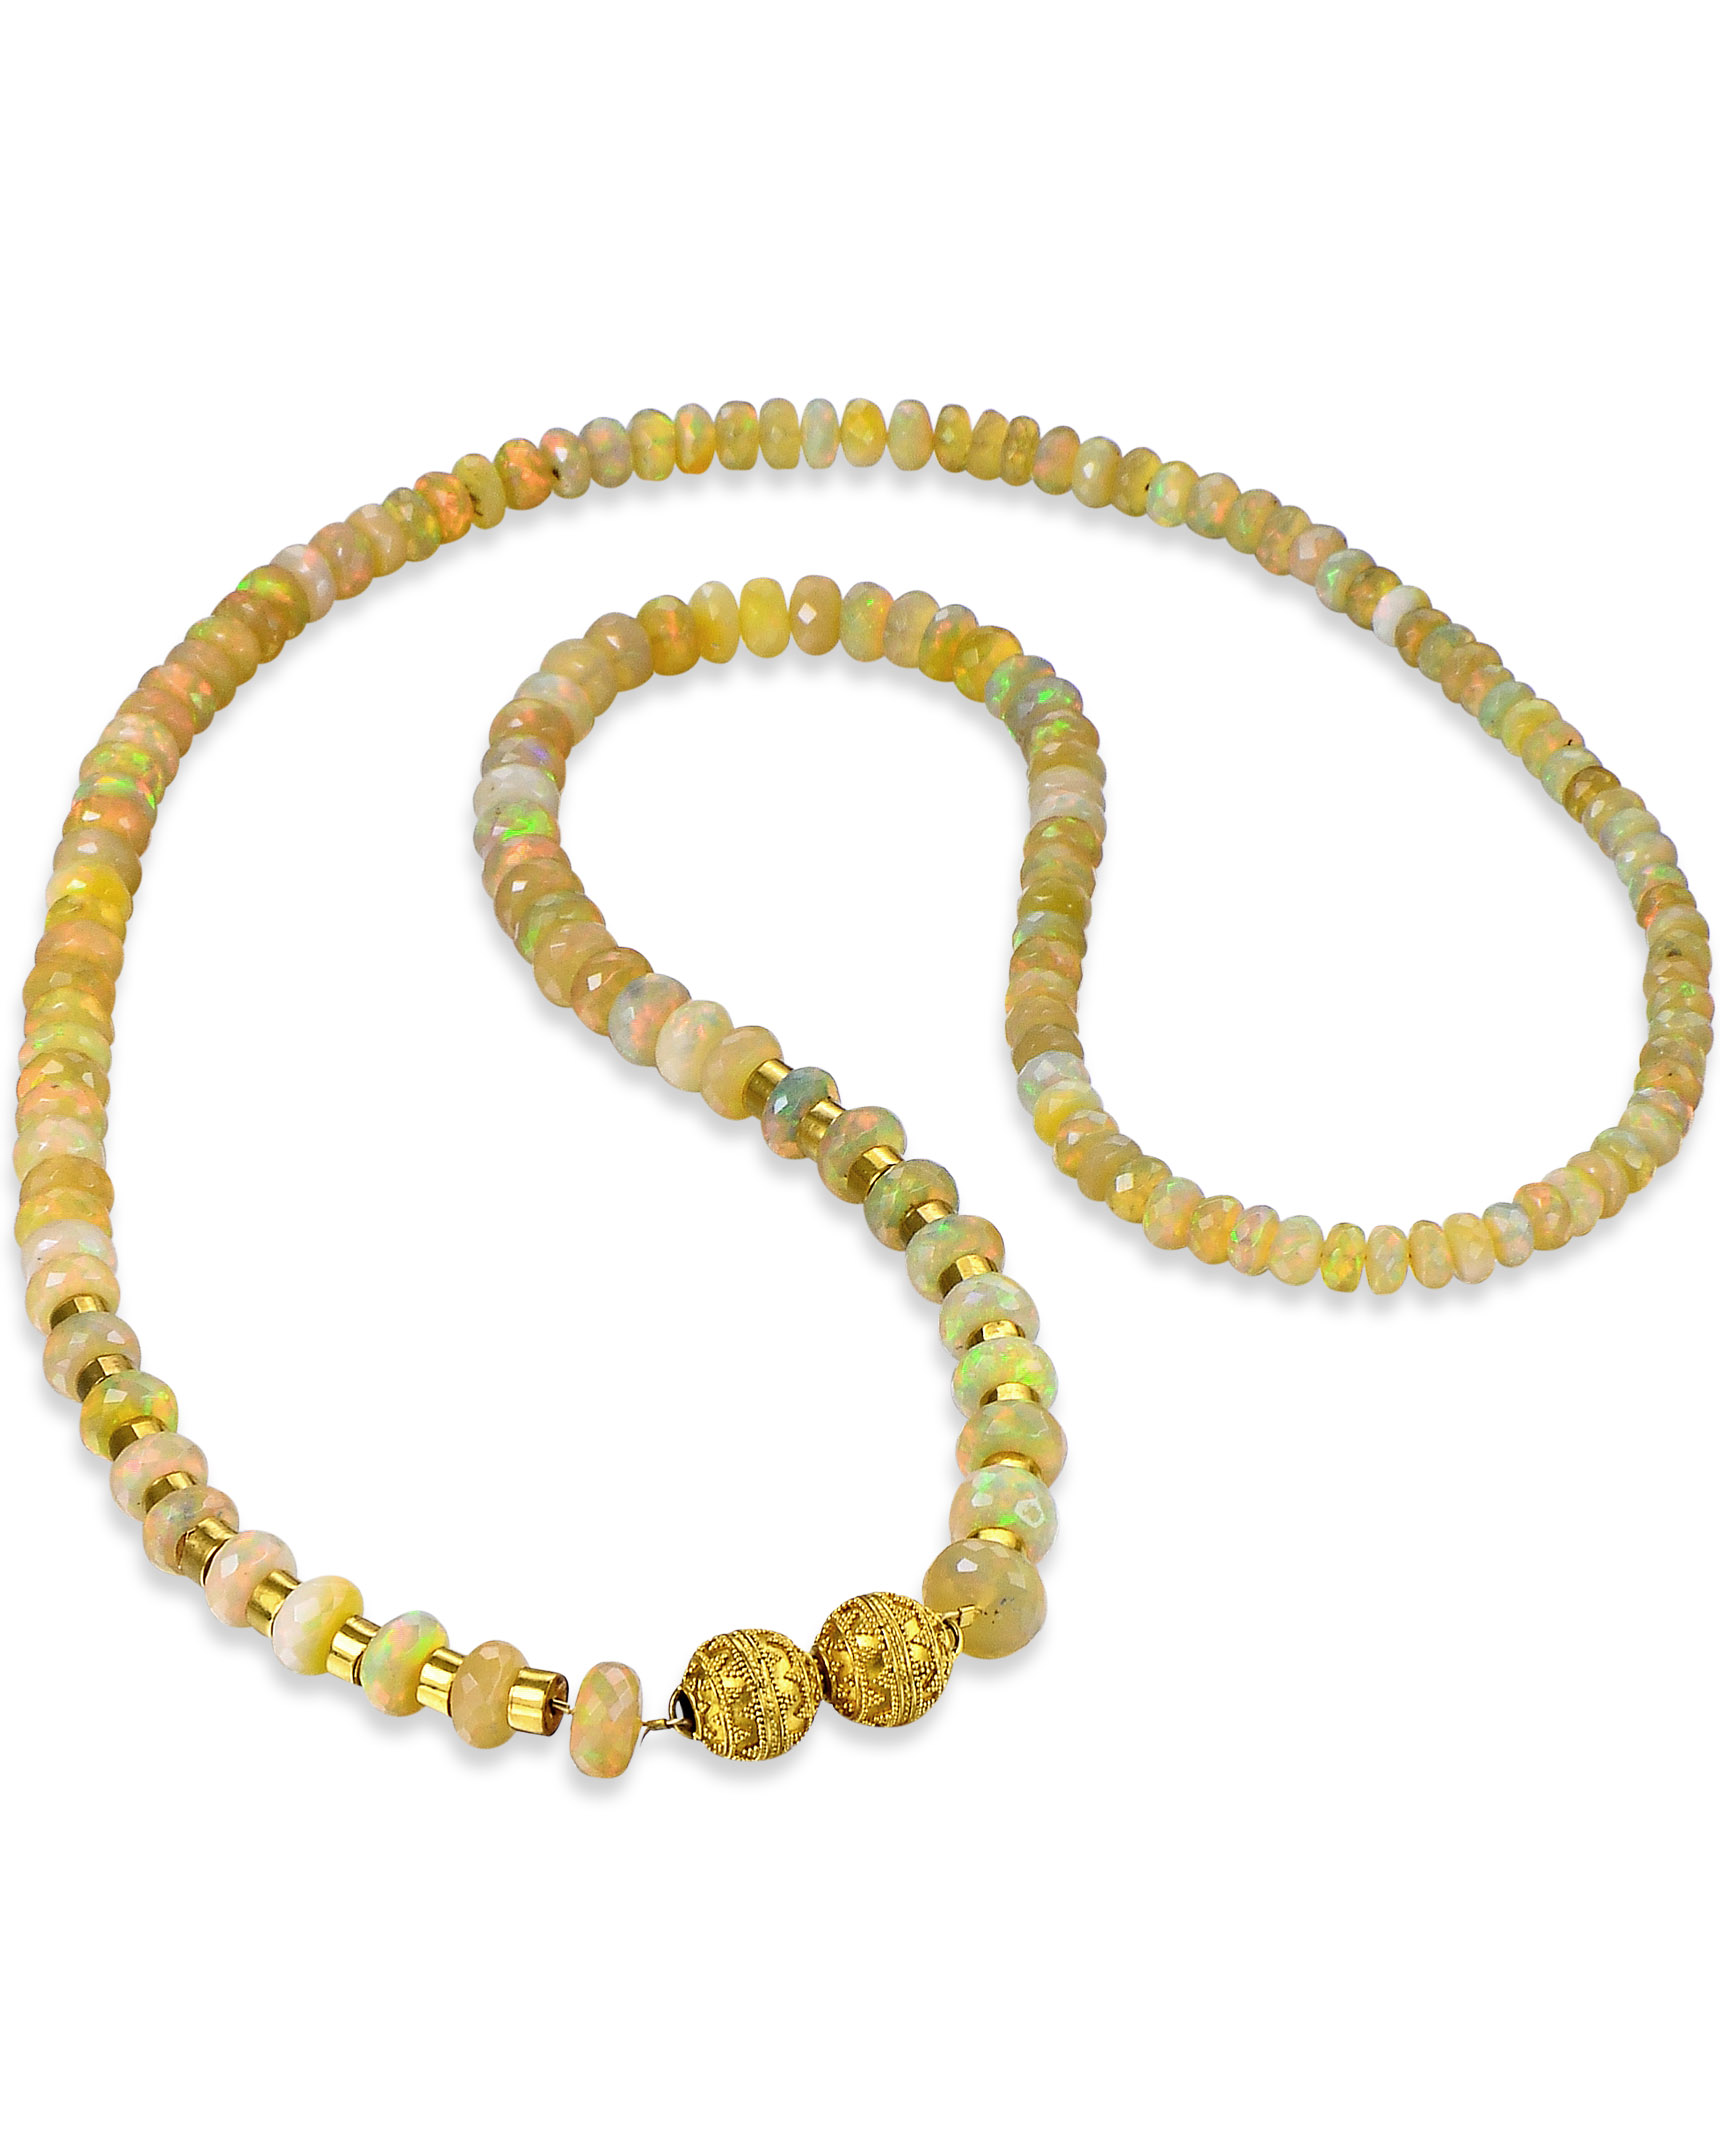 18 Yellow Gold Ethiopian Opal Beaded Necklace Strand - Dianna Rae Jewelry